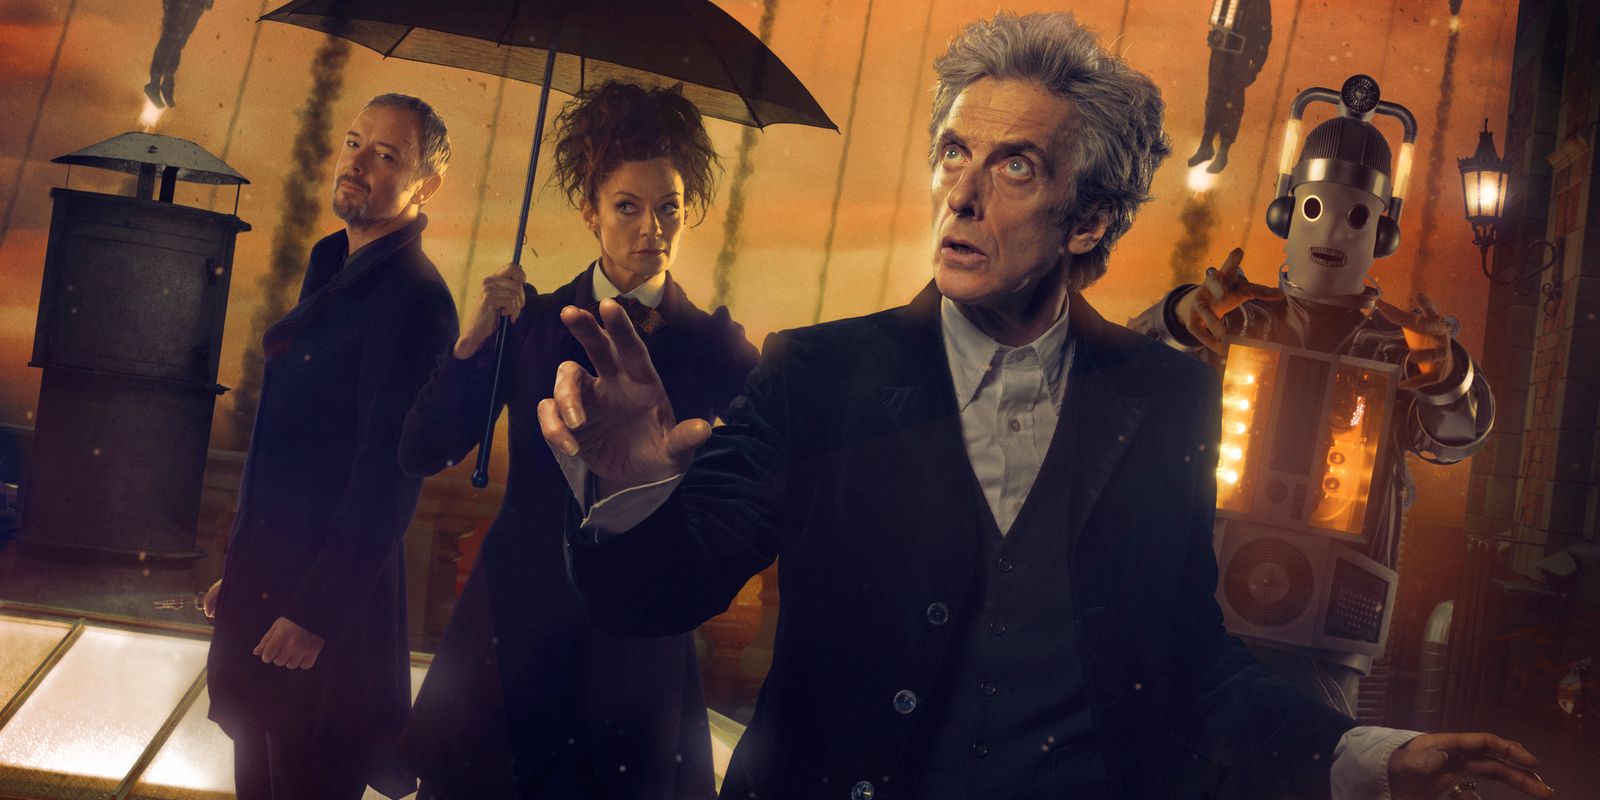 Doctor Who Season 10 Finale Review & Discussion